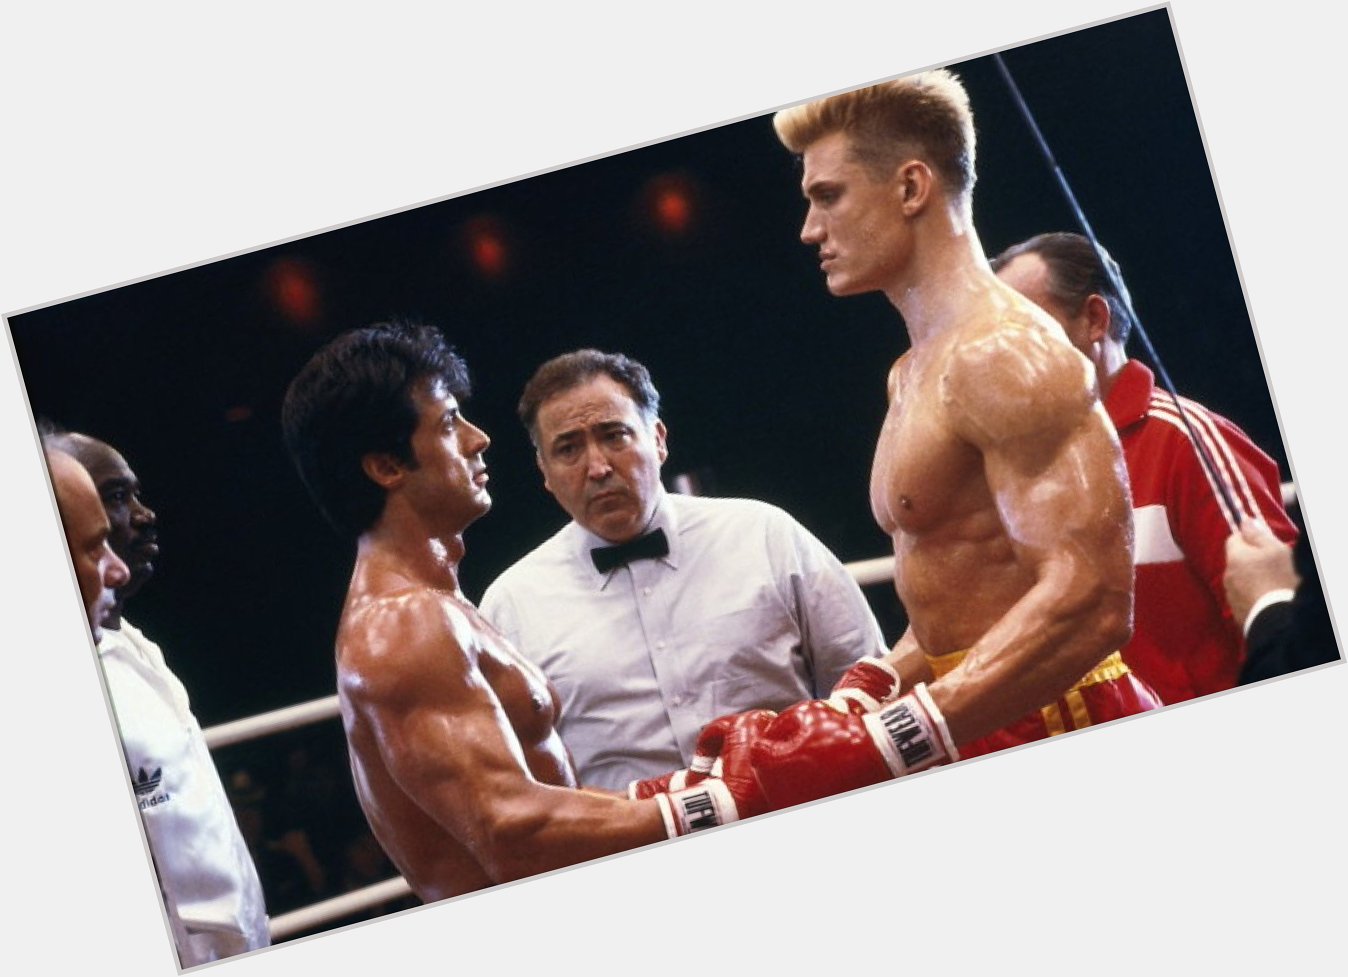 Happy Birthday to Dolph Lundgren(right) who turns 60 today! 